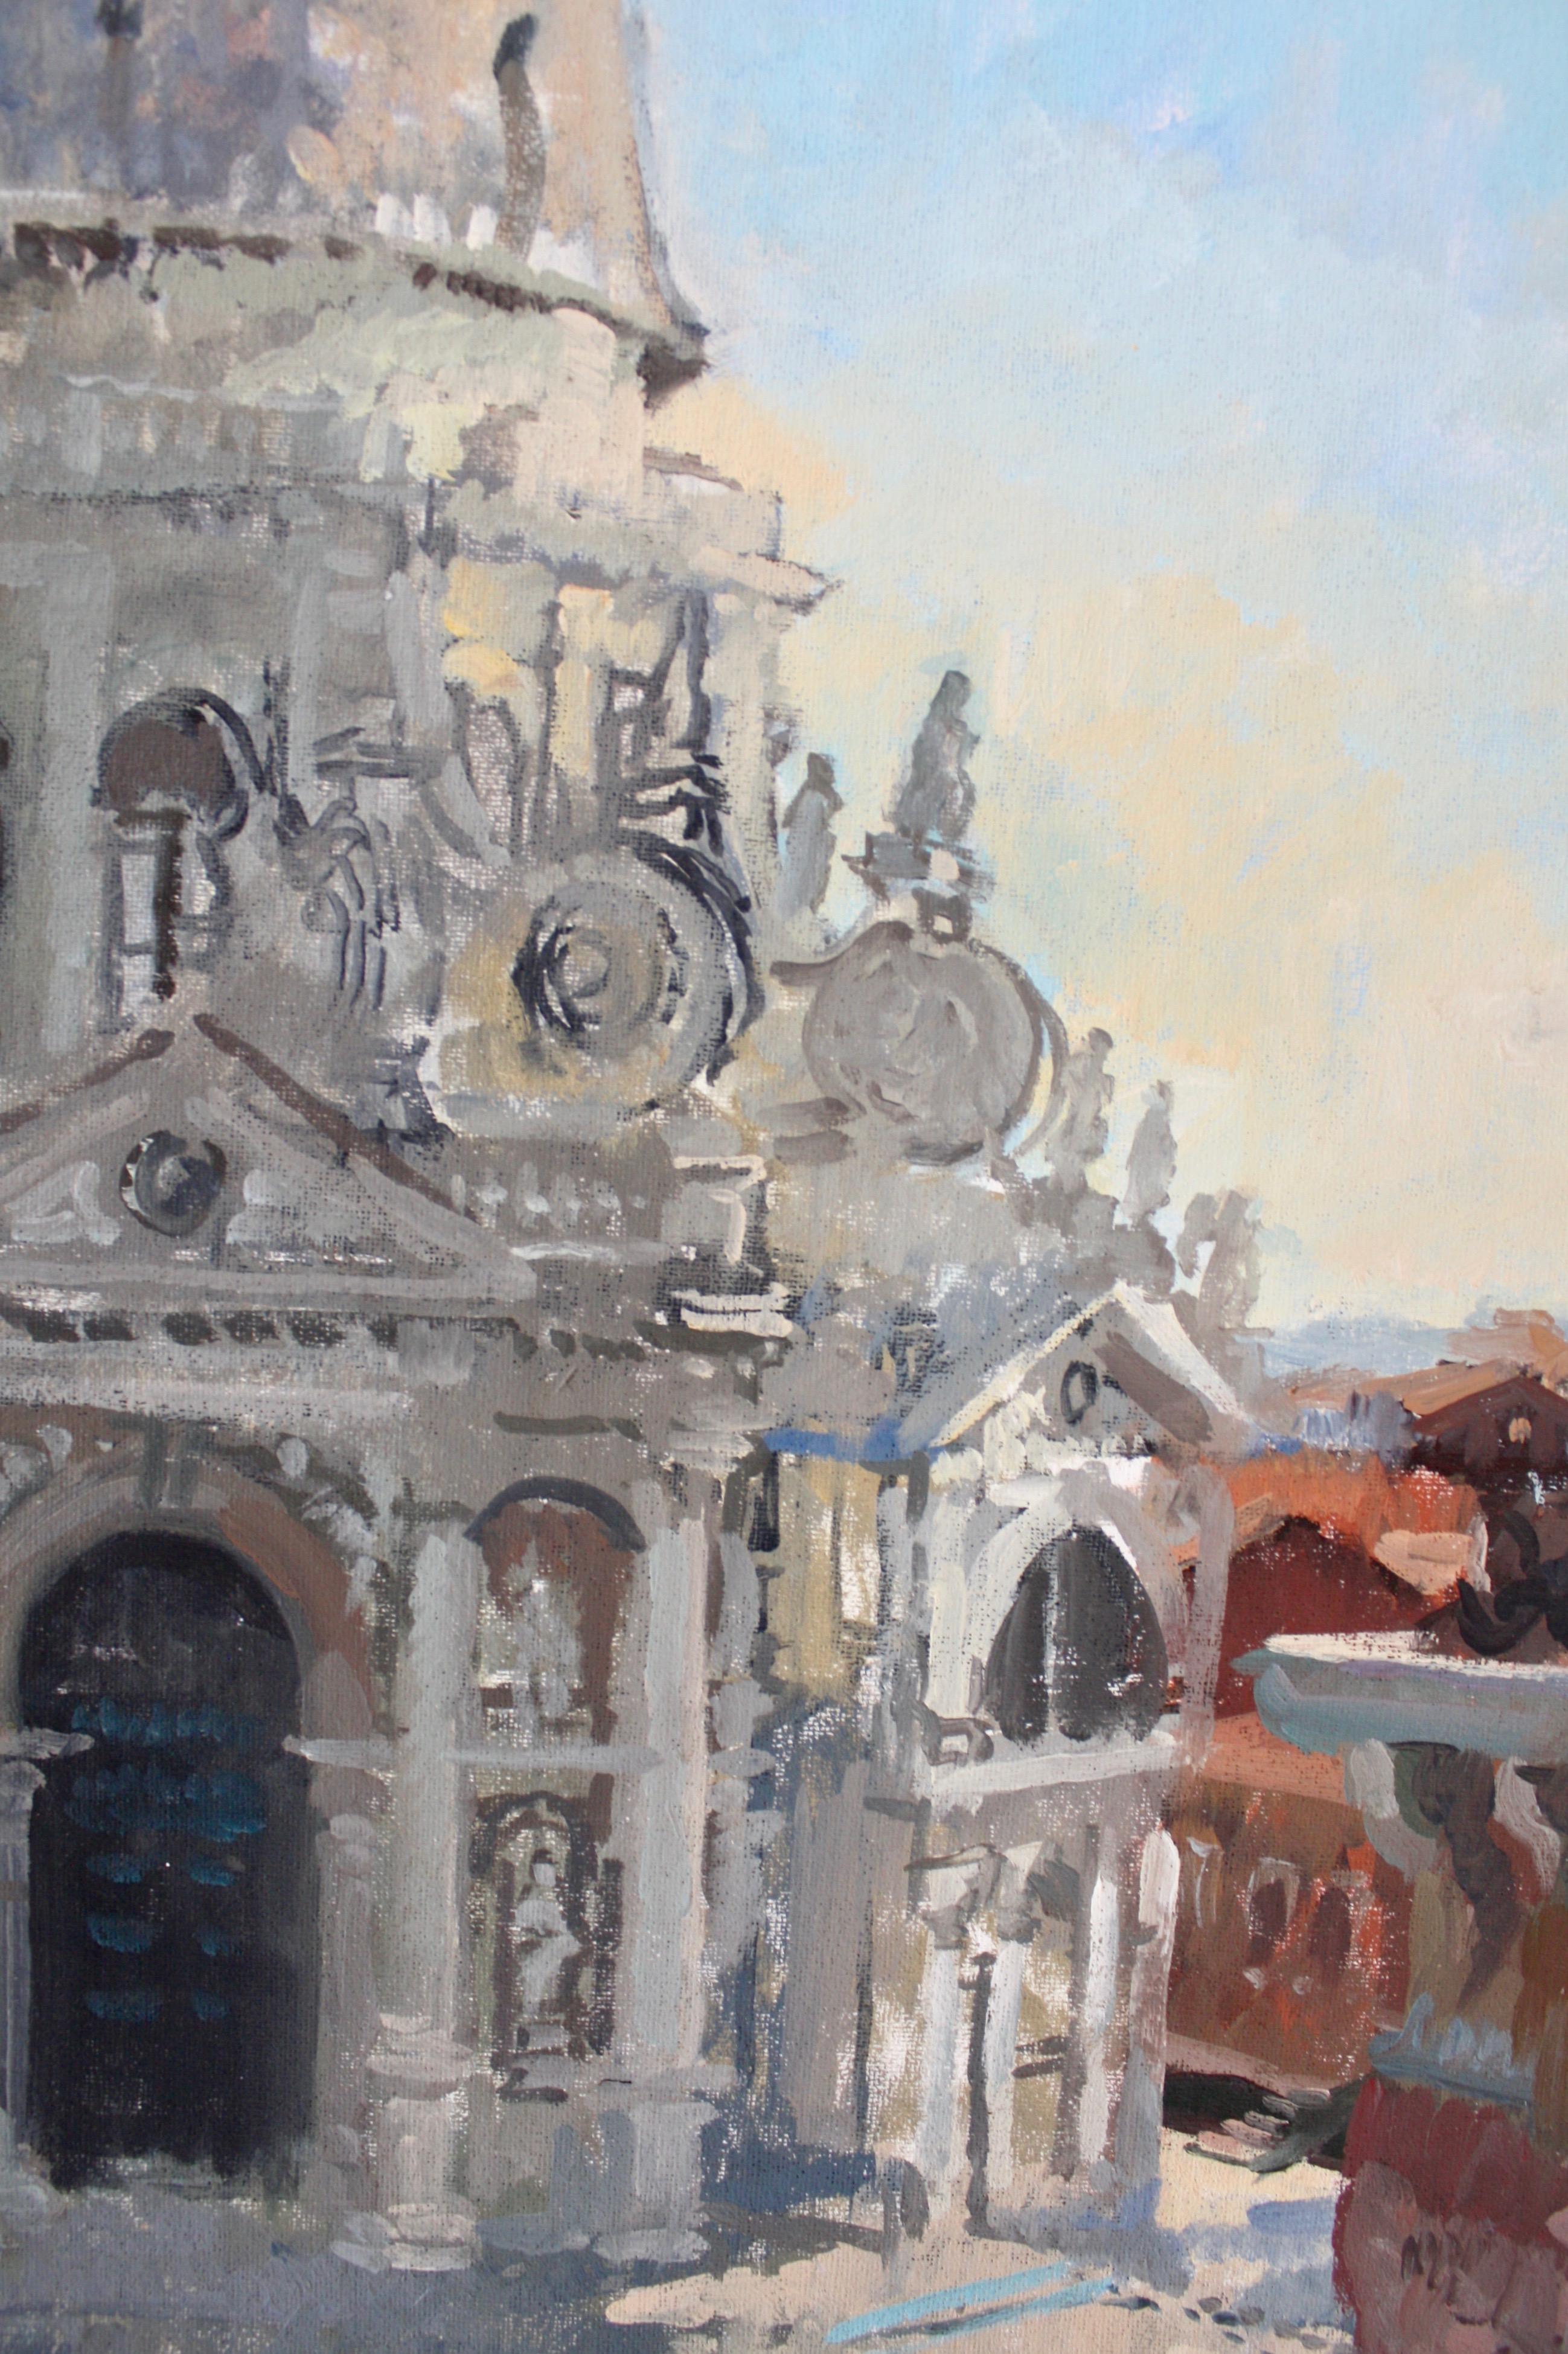 SANTA MARIA DEL SALUTE, ITALY - Impressionist Painting by Peter Kuhfeld